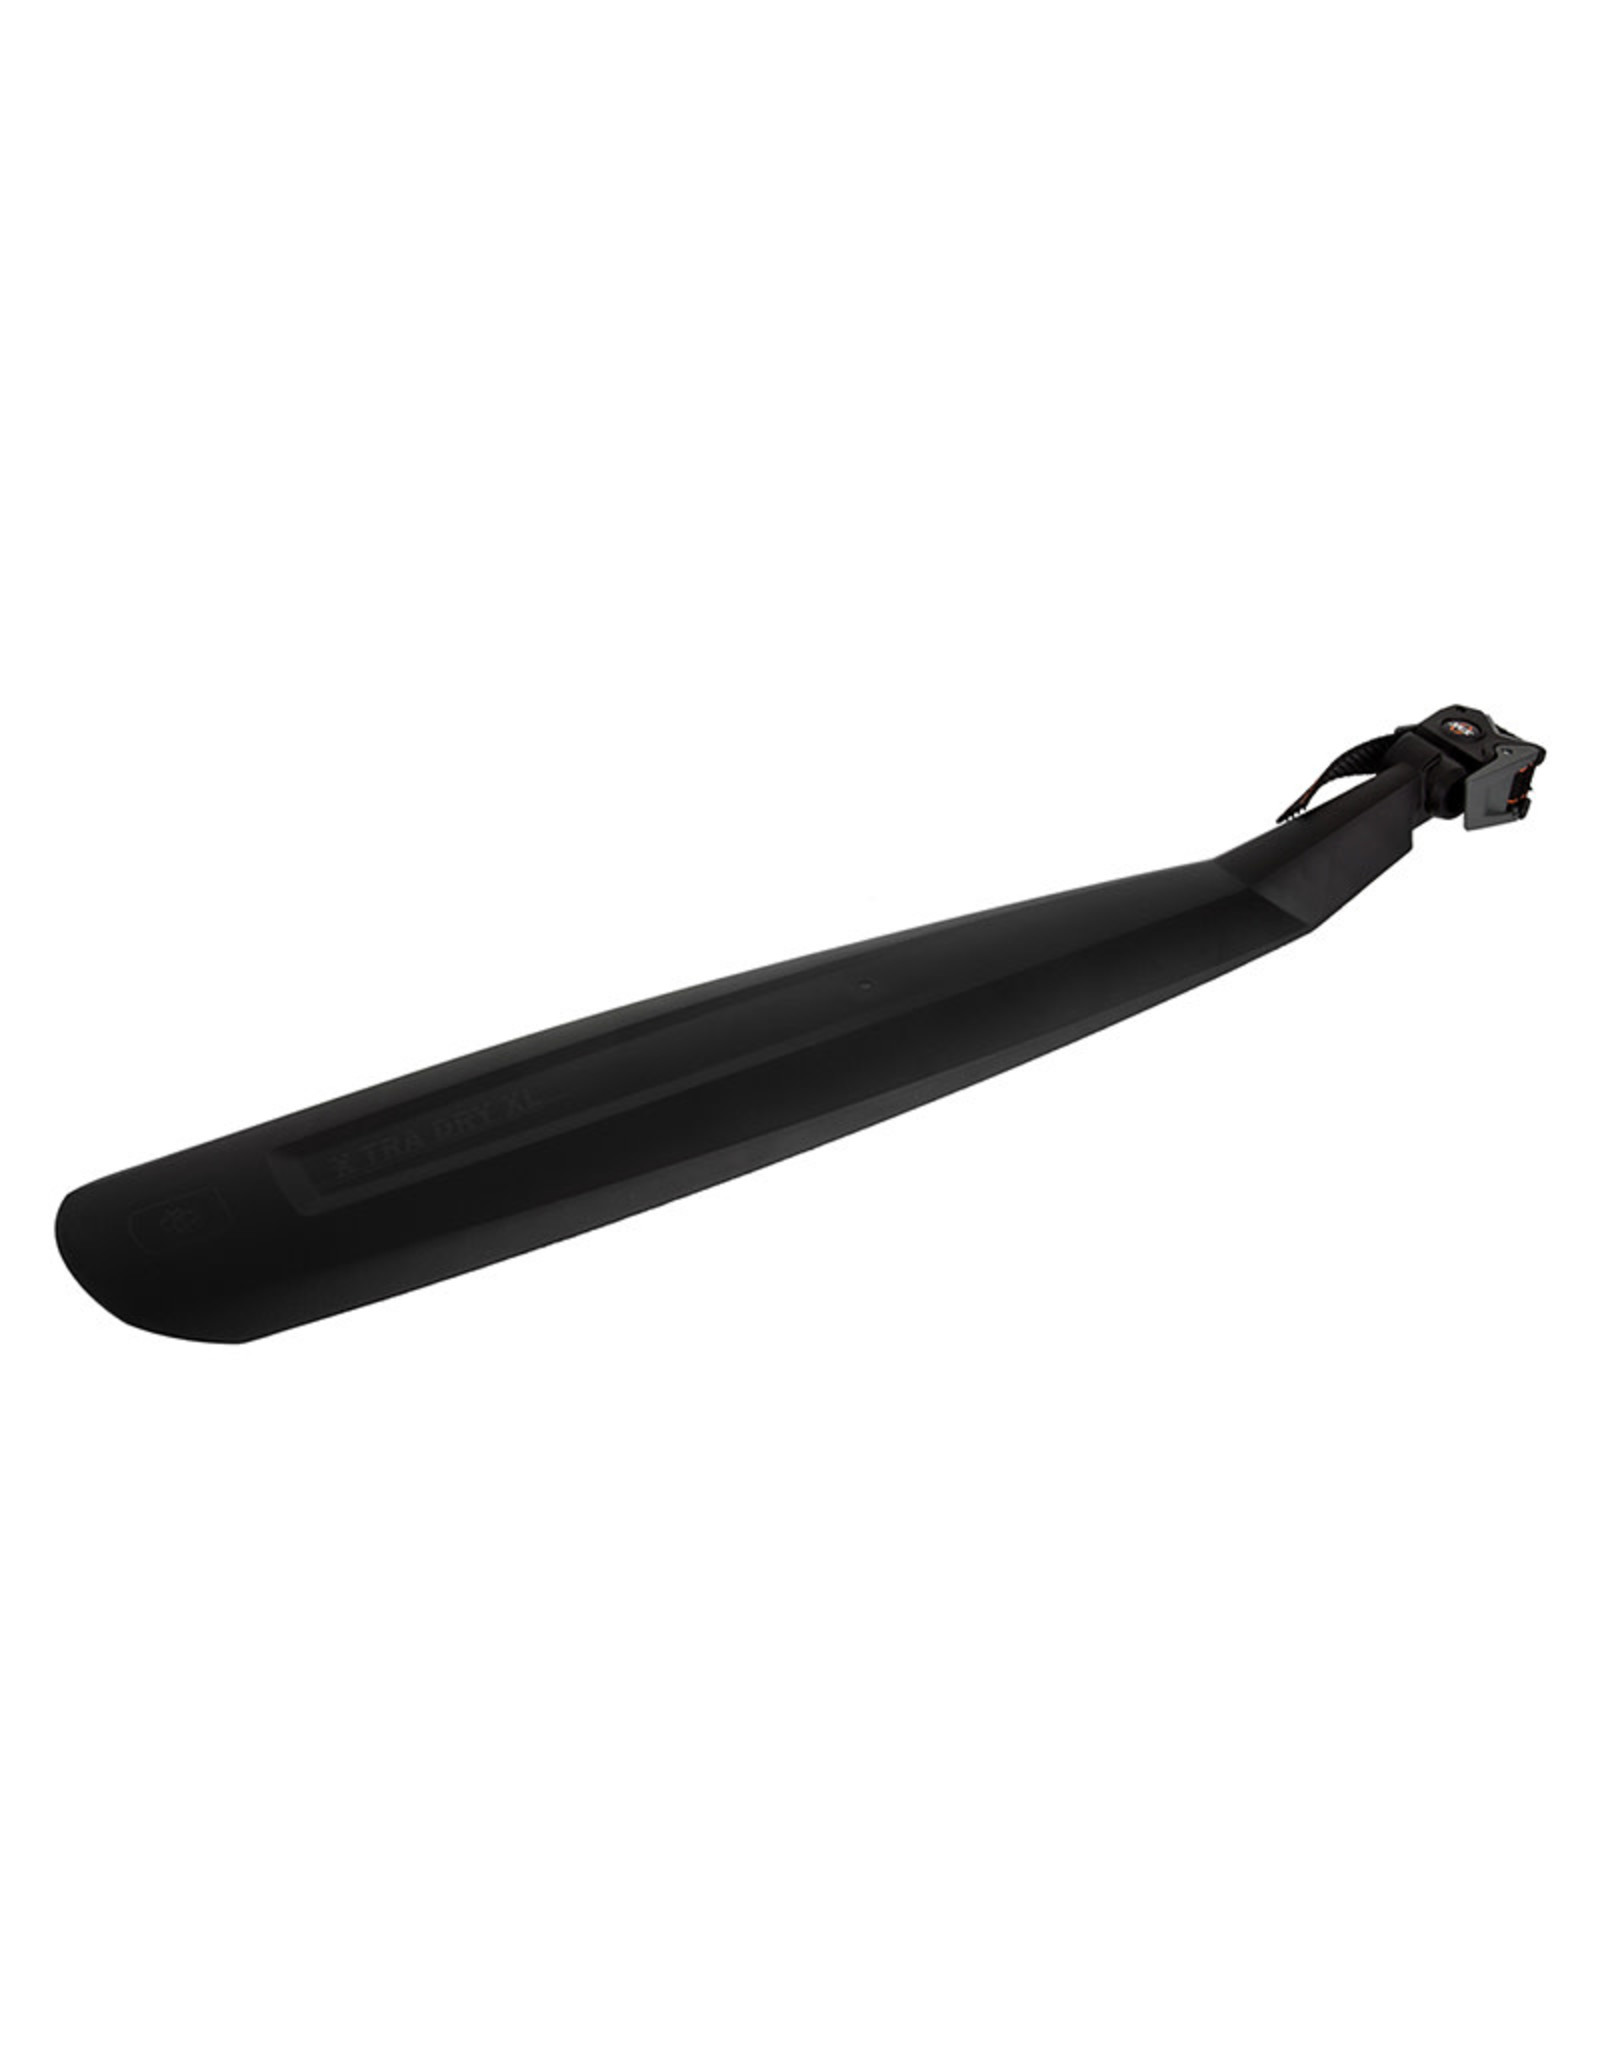 SKS SKS X-tra Dry XL Quick Release Rear Fender